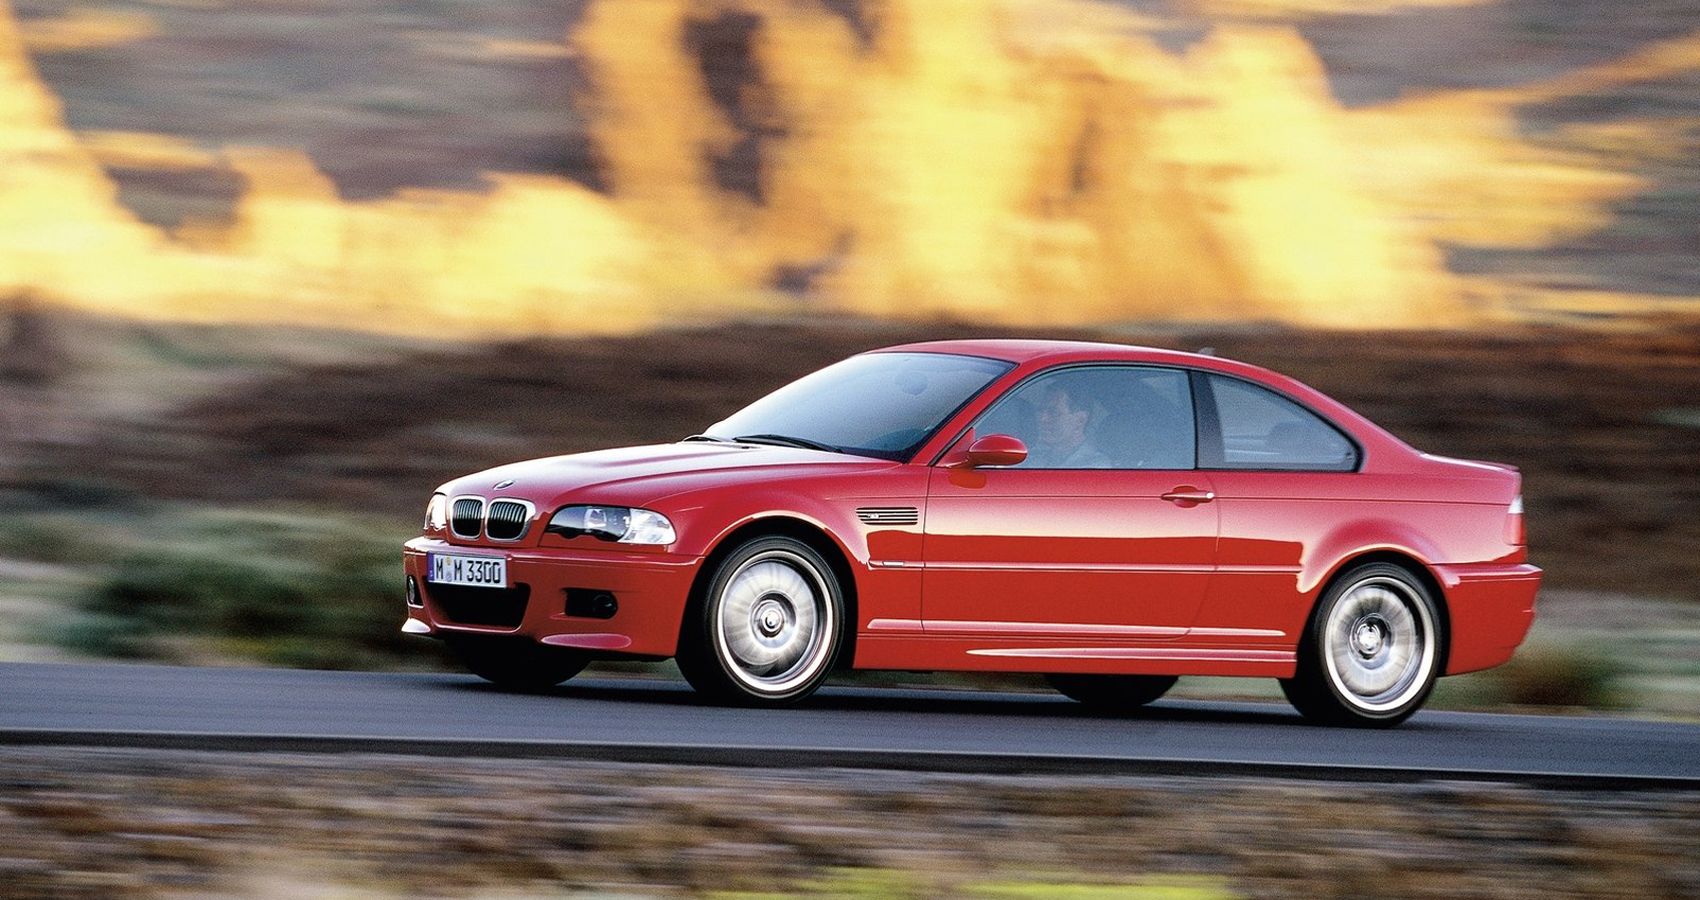 Front 3/4 view of a red E46 M3 on the move